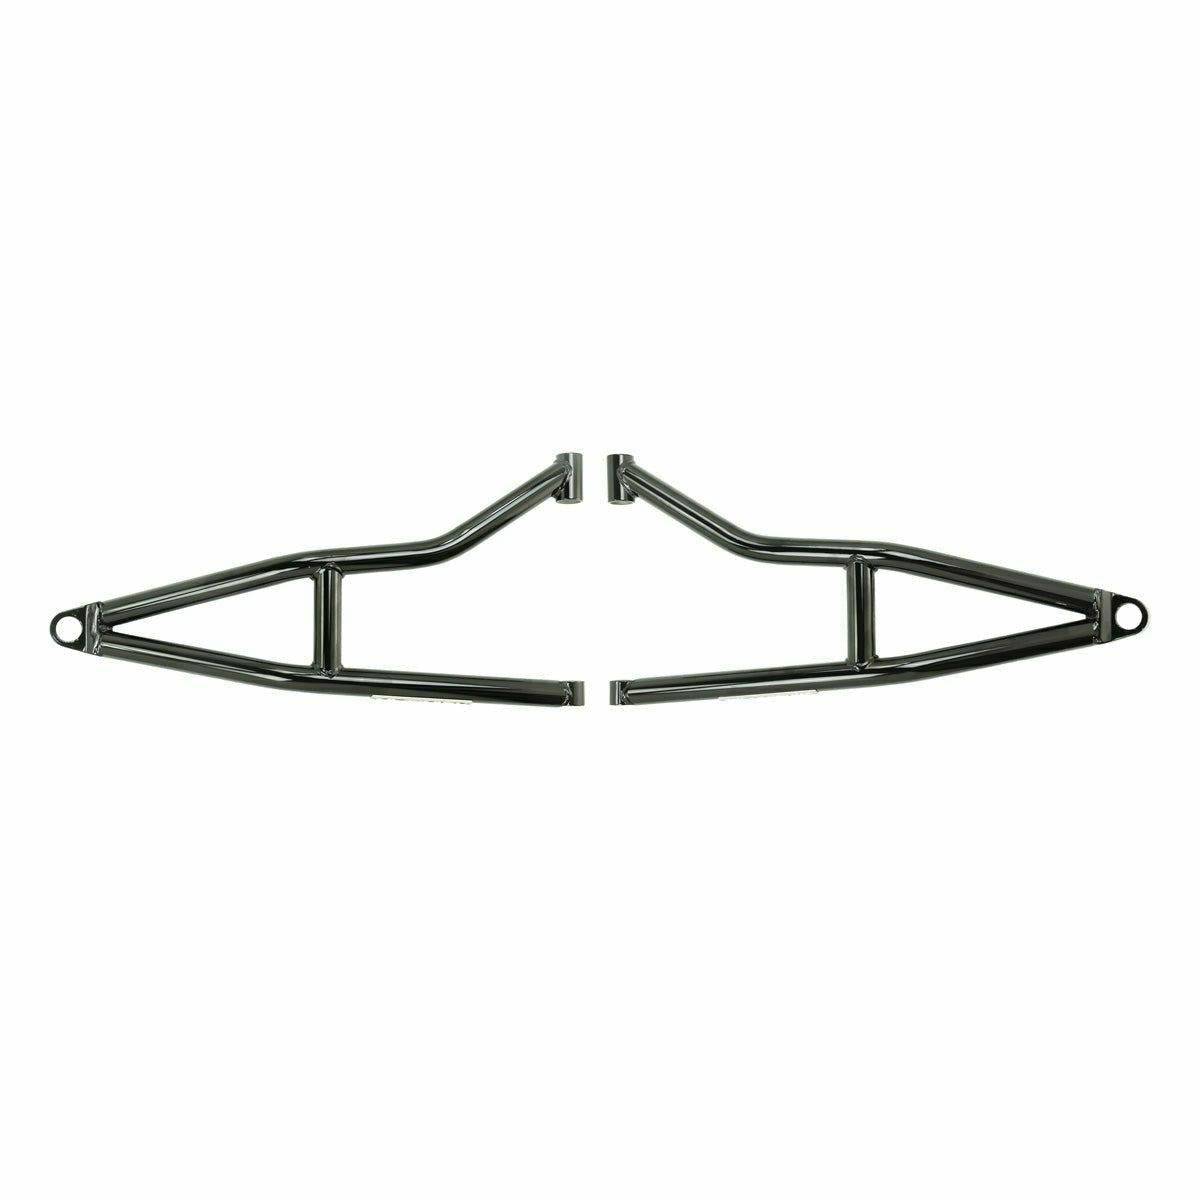 Deviant Polaris RZR XP Turbo S High Clearance Lower Control Arms